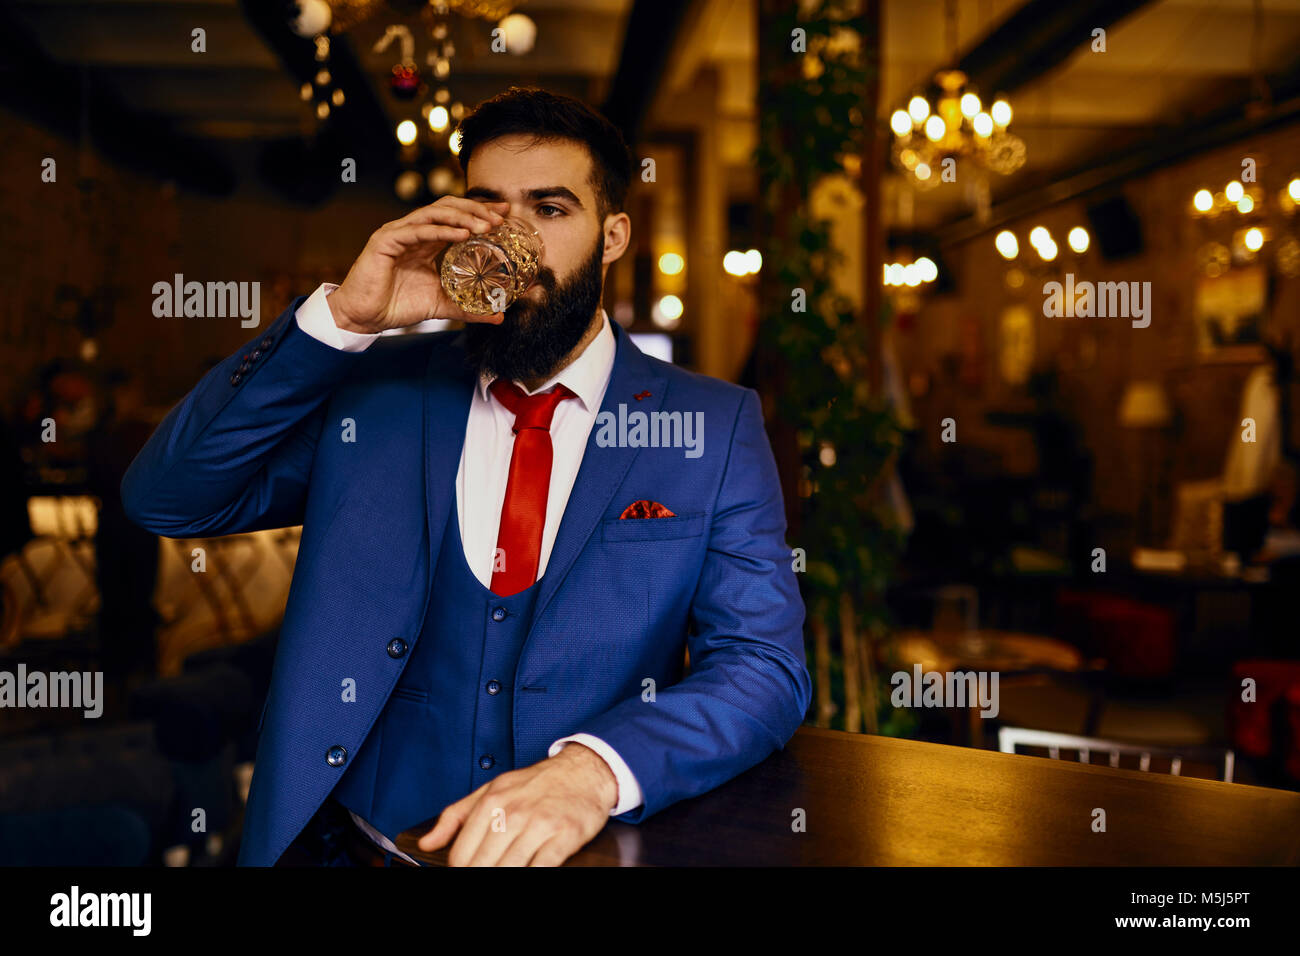 Eegant young man in a bar drinking from tumbler Stock Photo